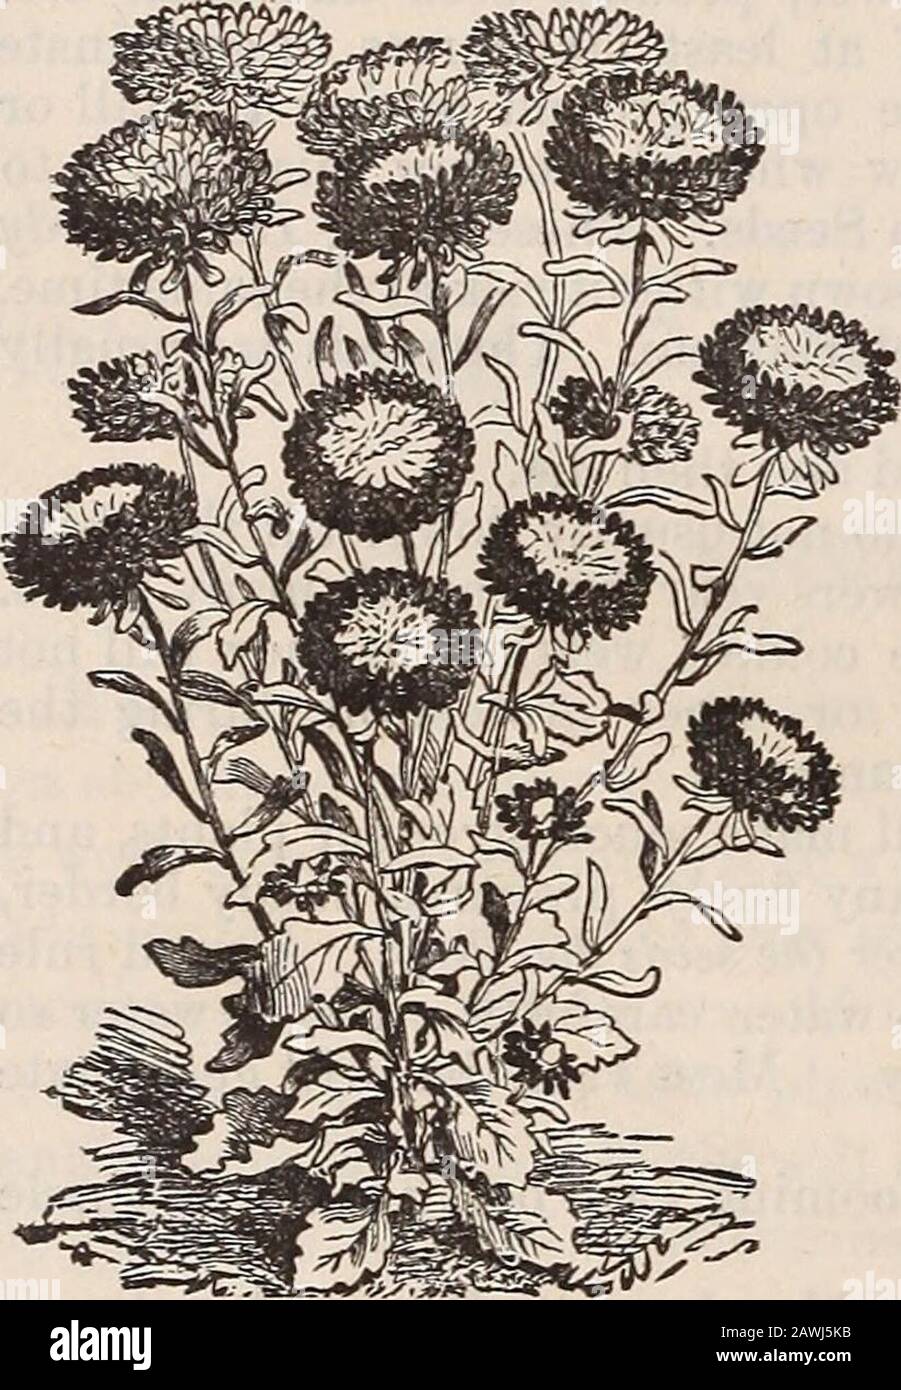 Catalogue of seeds, agricultural & horticultural supplies and guide for the garden, field & farm . oc5c Ageratum Mexicanum (Imperial Dwarf). Height Price• in feet Carmine scarlet foliage 2 Various shades of red 2 per pkt. 5c10c10c10c5c10c. 10c 5c 10c 10c10c10c10c15c15c 10c 15c15c Melancholicus Ruber, hh. Blood red 1 Salicifolius, hh [Fountain Plant]. Purple, crimson and gold 3 Tricolor, hh [Josephs Coat]. Red, green and yellow 1 Giganteus, hh 5 The Amaranthus are splendid plants to give a tropical effect in Mixed Borders and Shrubbery.Plant in sunny places, and poor soil. Anagallis, mixed, var Stock Photo